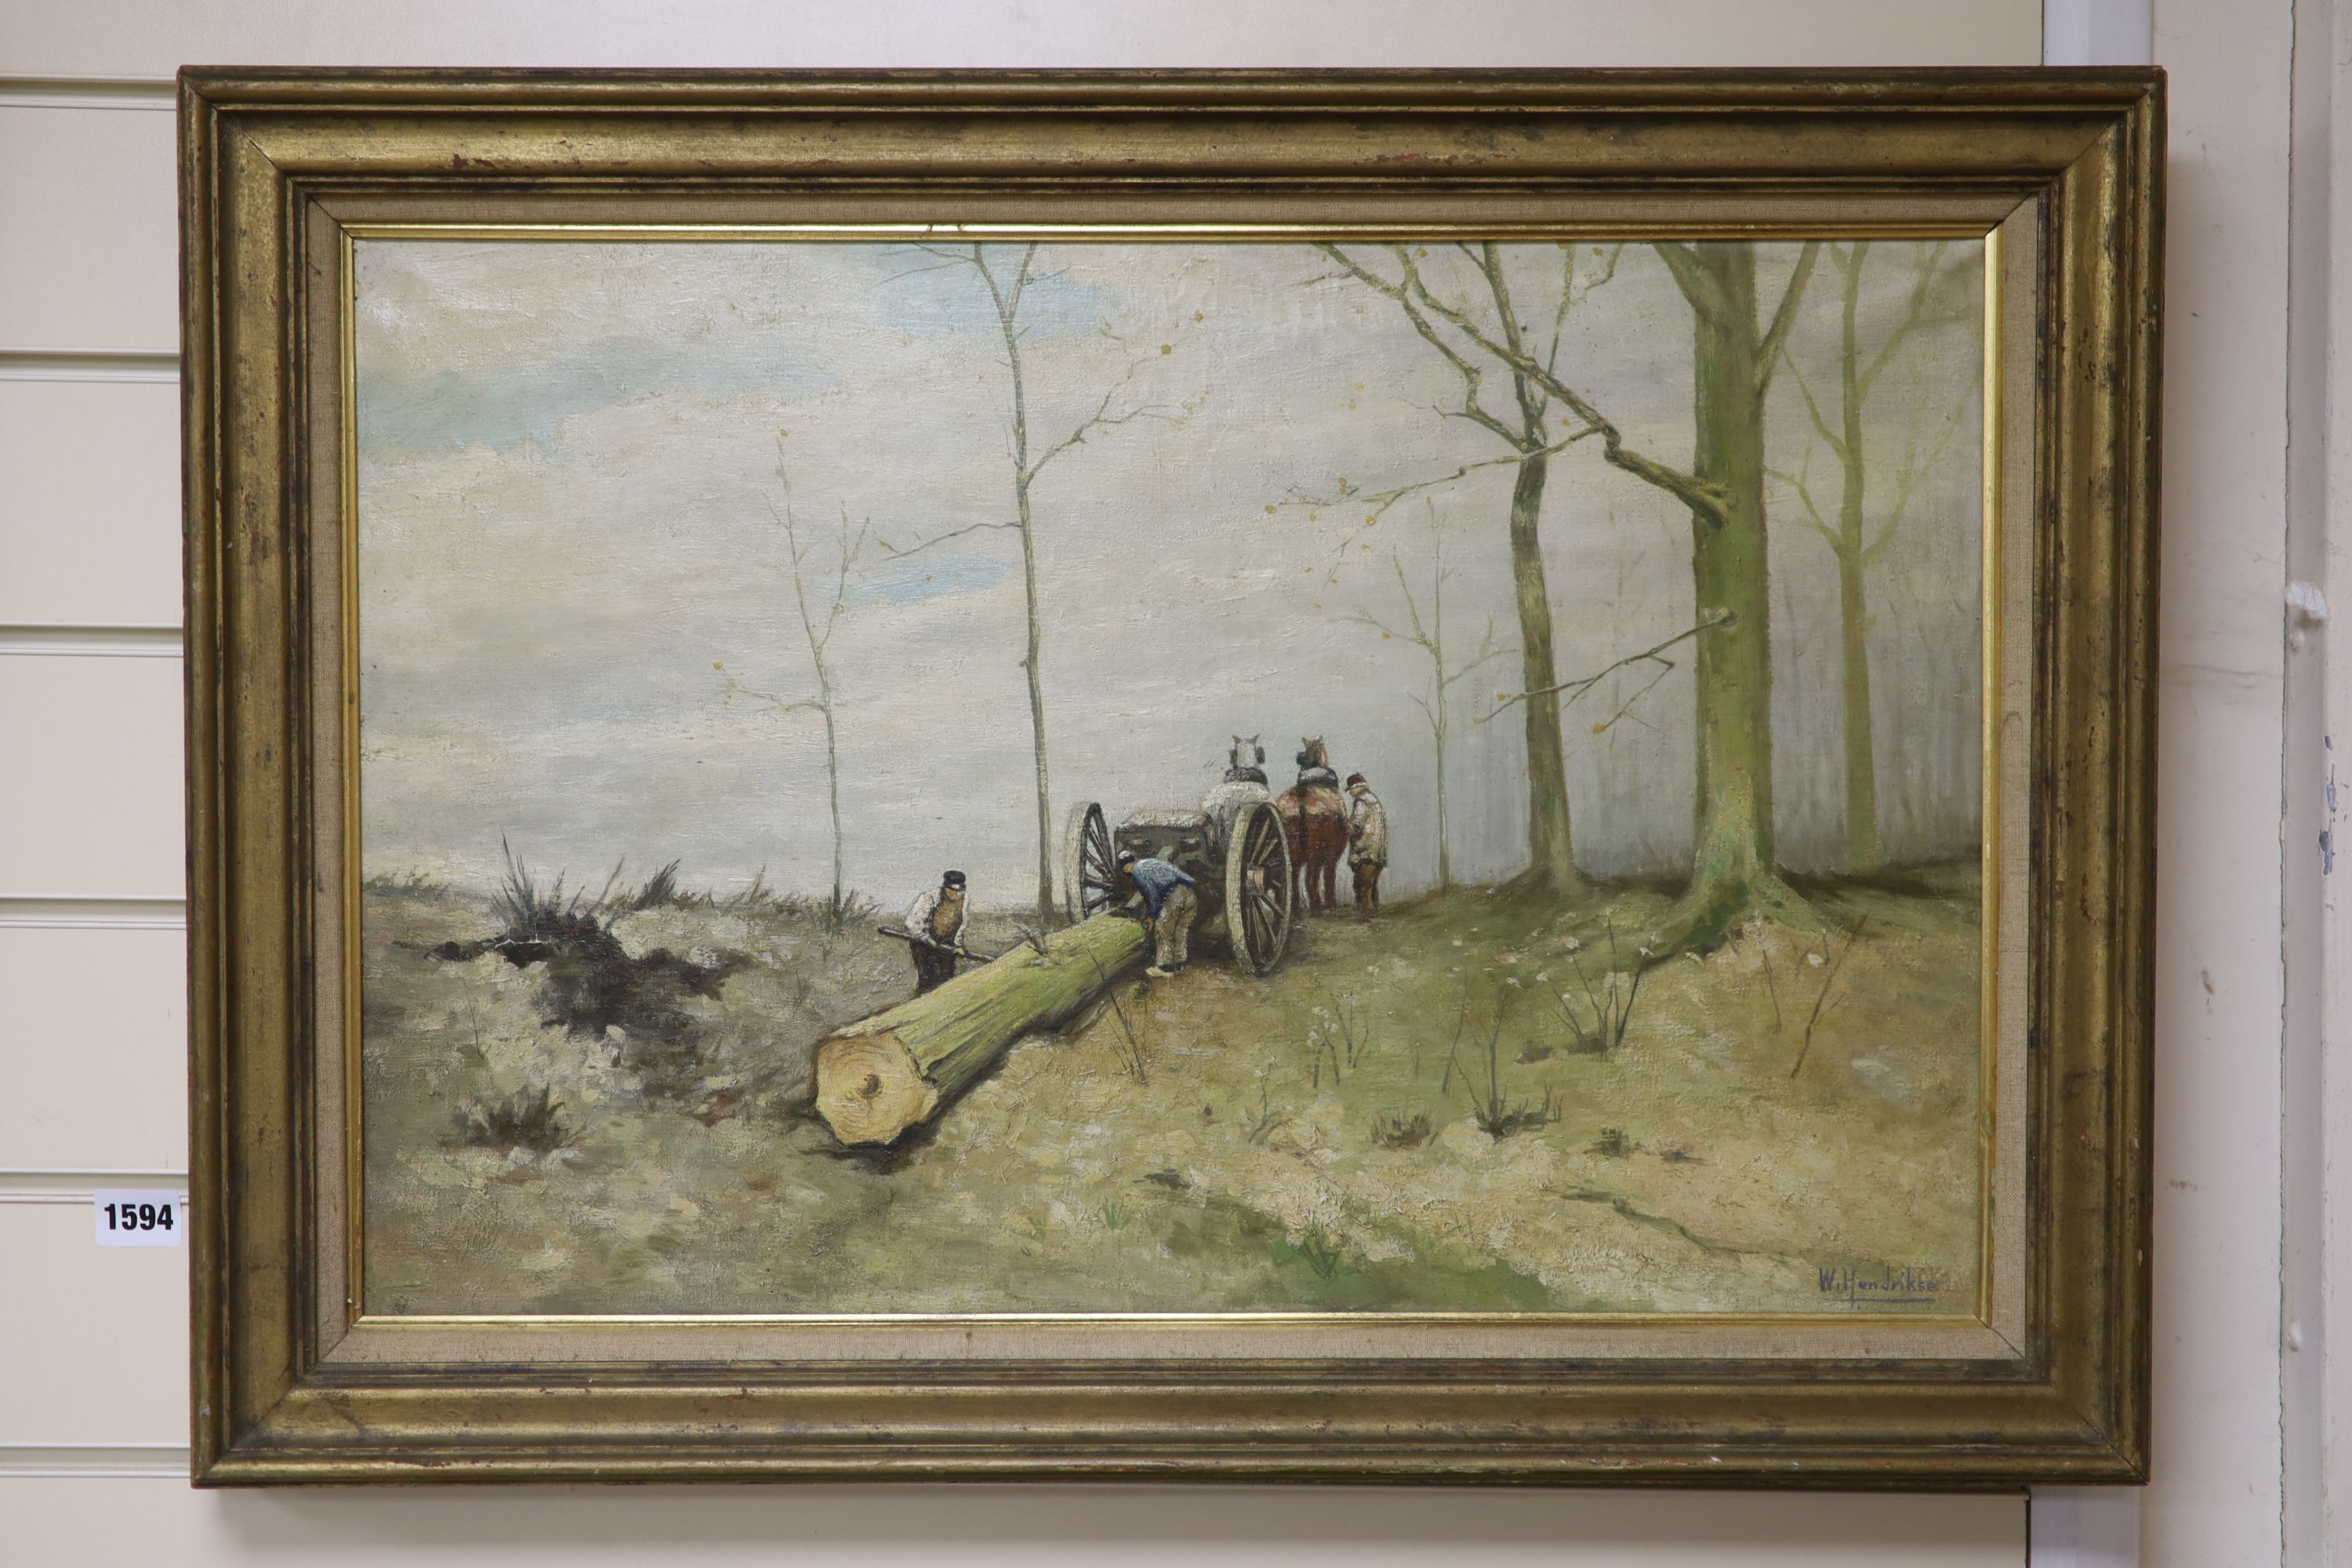 W. Hendrikse (Danish), oil on canvas, Timber haulers dragging a tree trunk, signed, 39 x 58cm